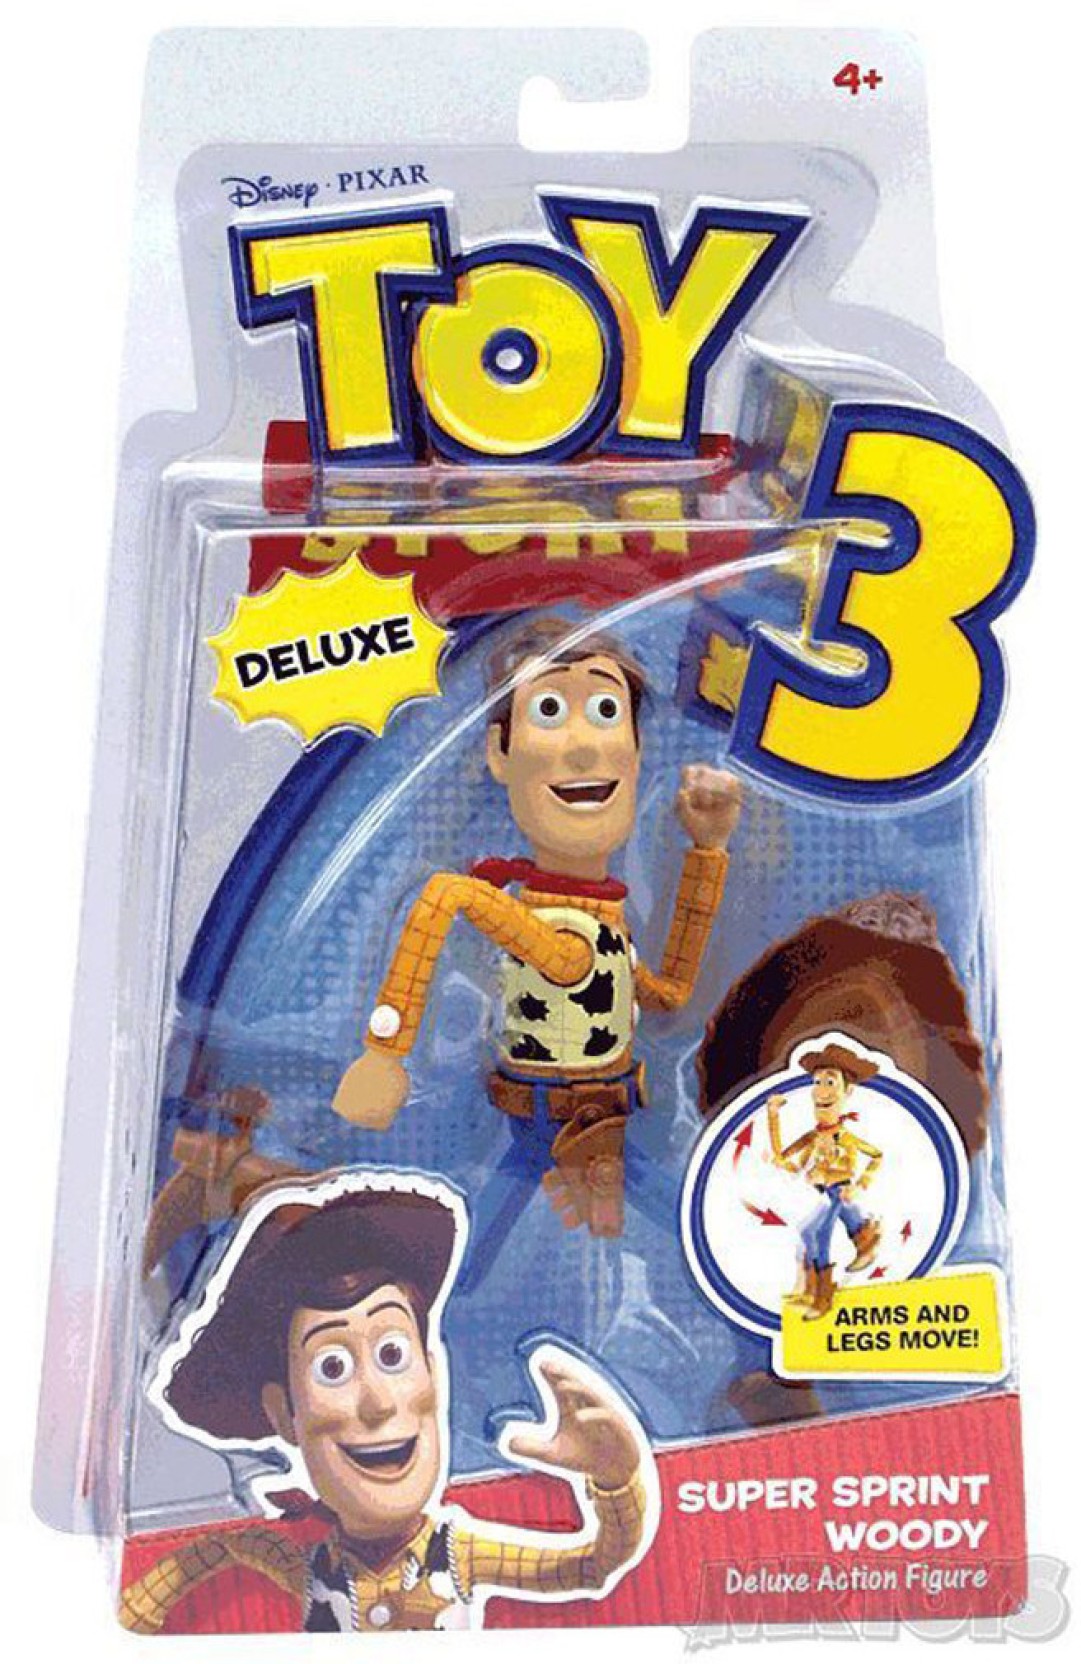 Toy Story 3 Woody Action Figure - 3 Woody Action Figure . Buy Batman